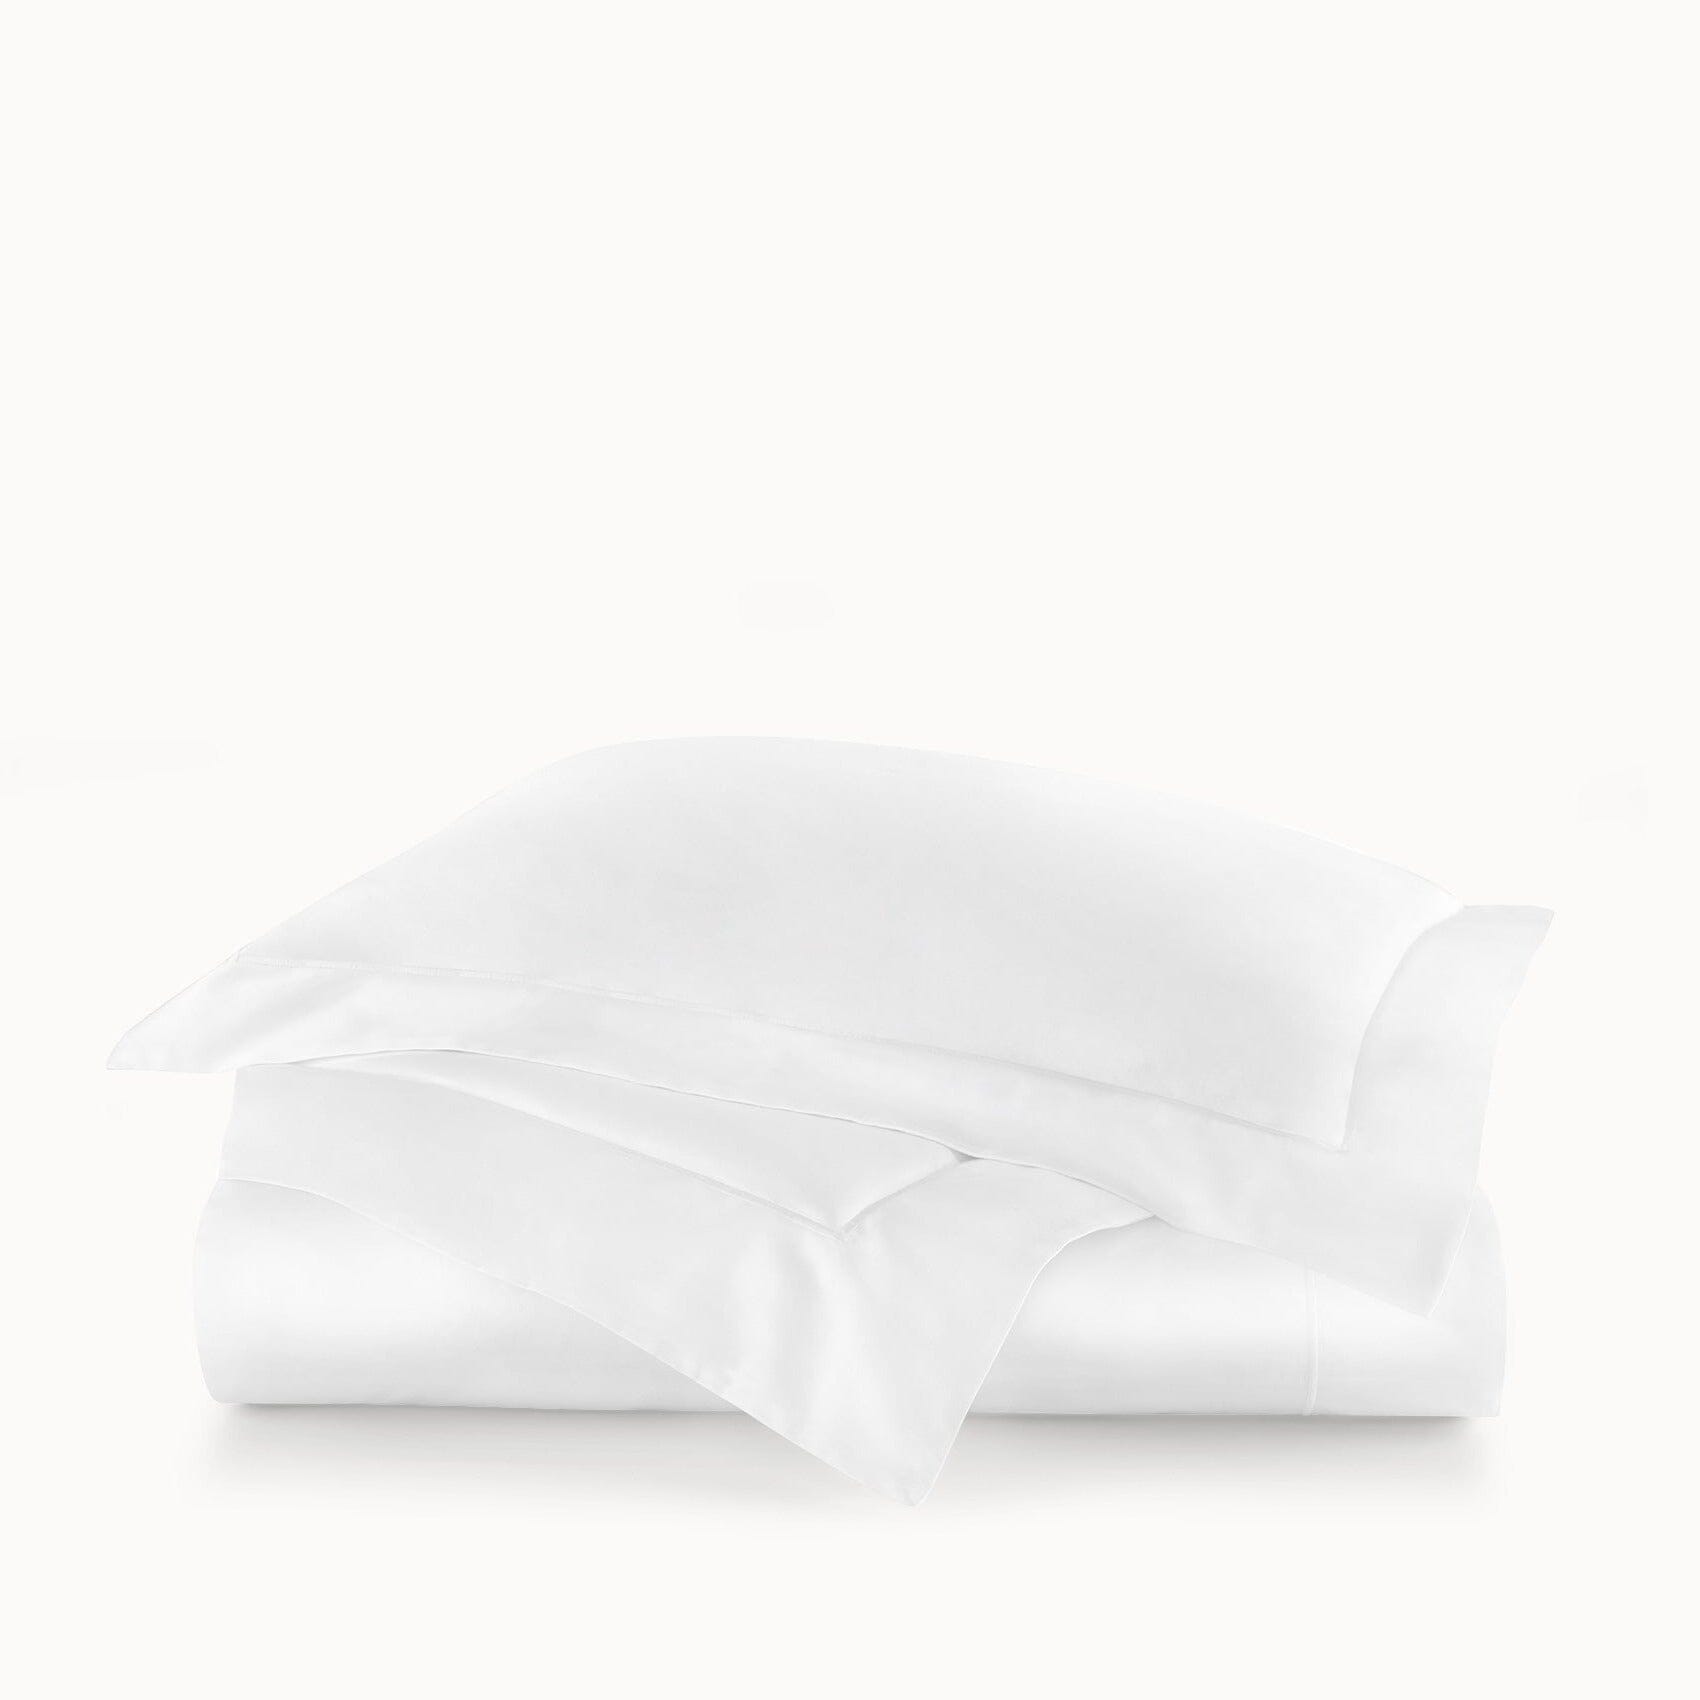 Peacock Alley Bedding - White Cotton Sateen Duvet Covers, Sheets and Pillow Shams